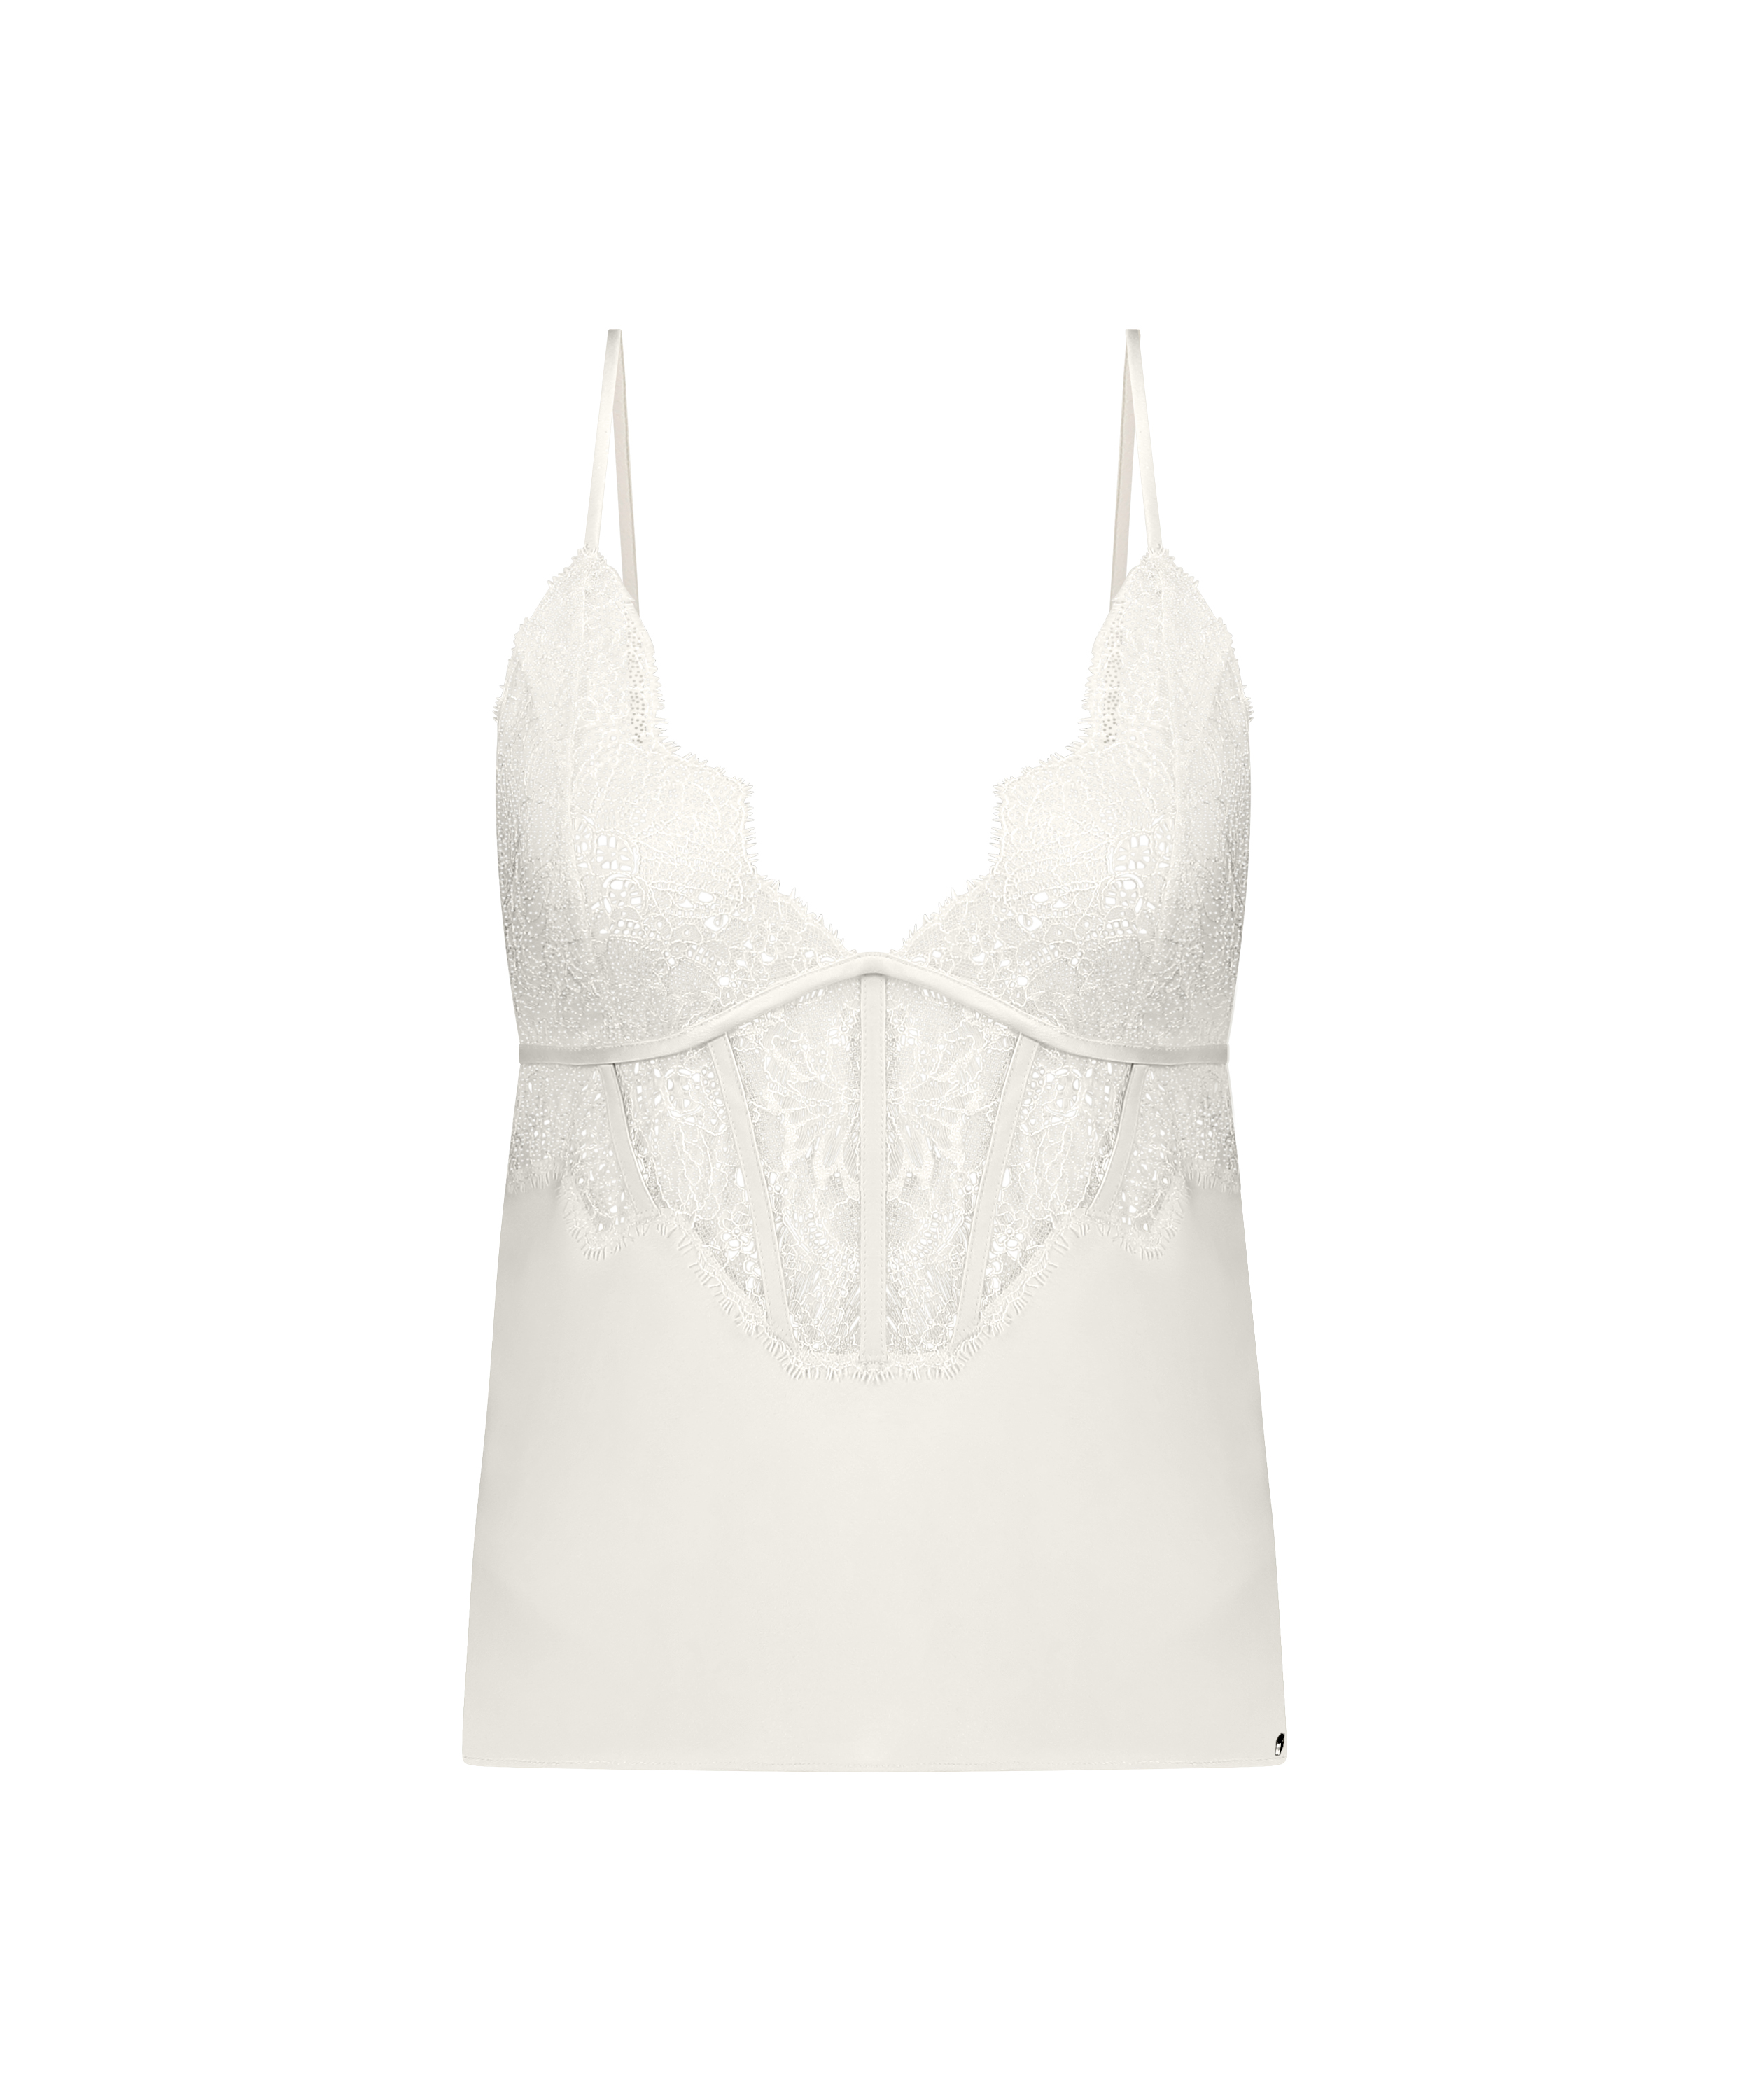 Camille Top, White, main